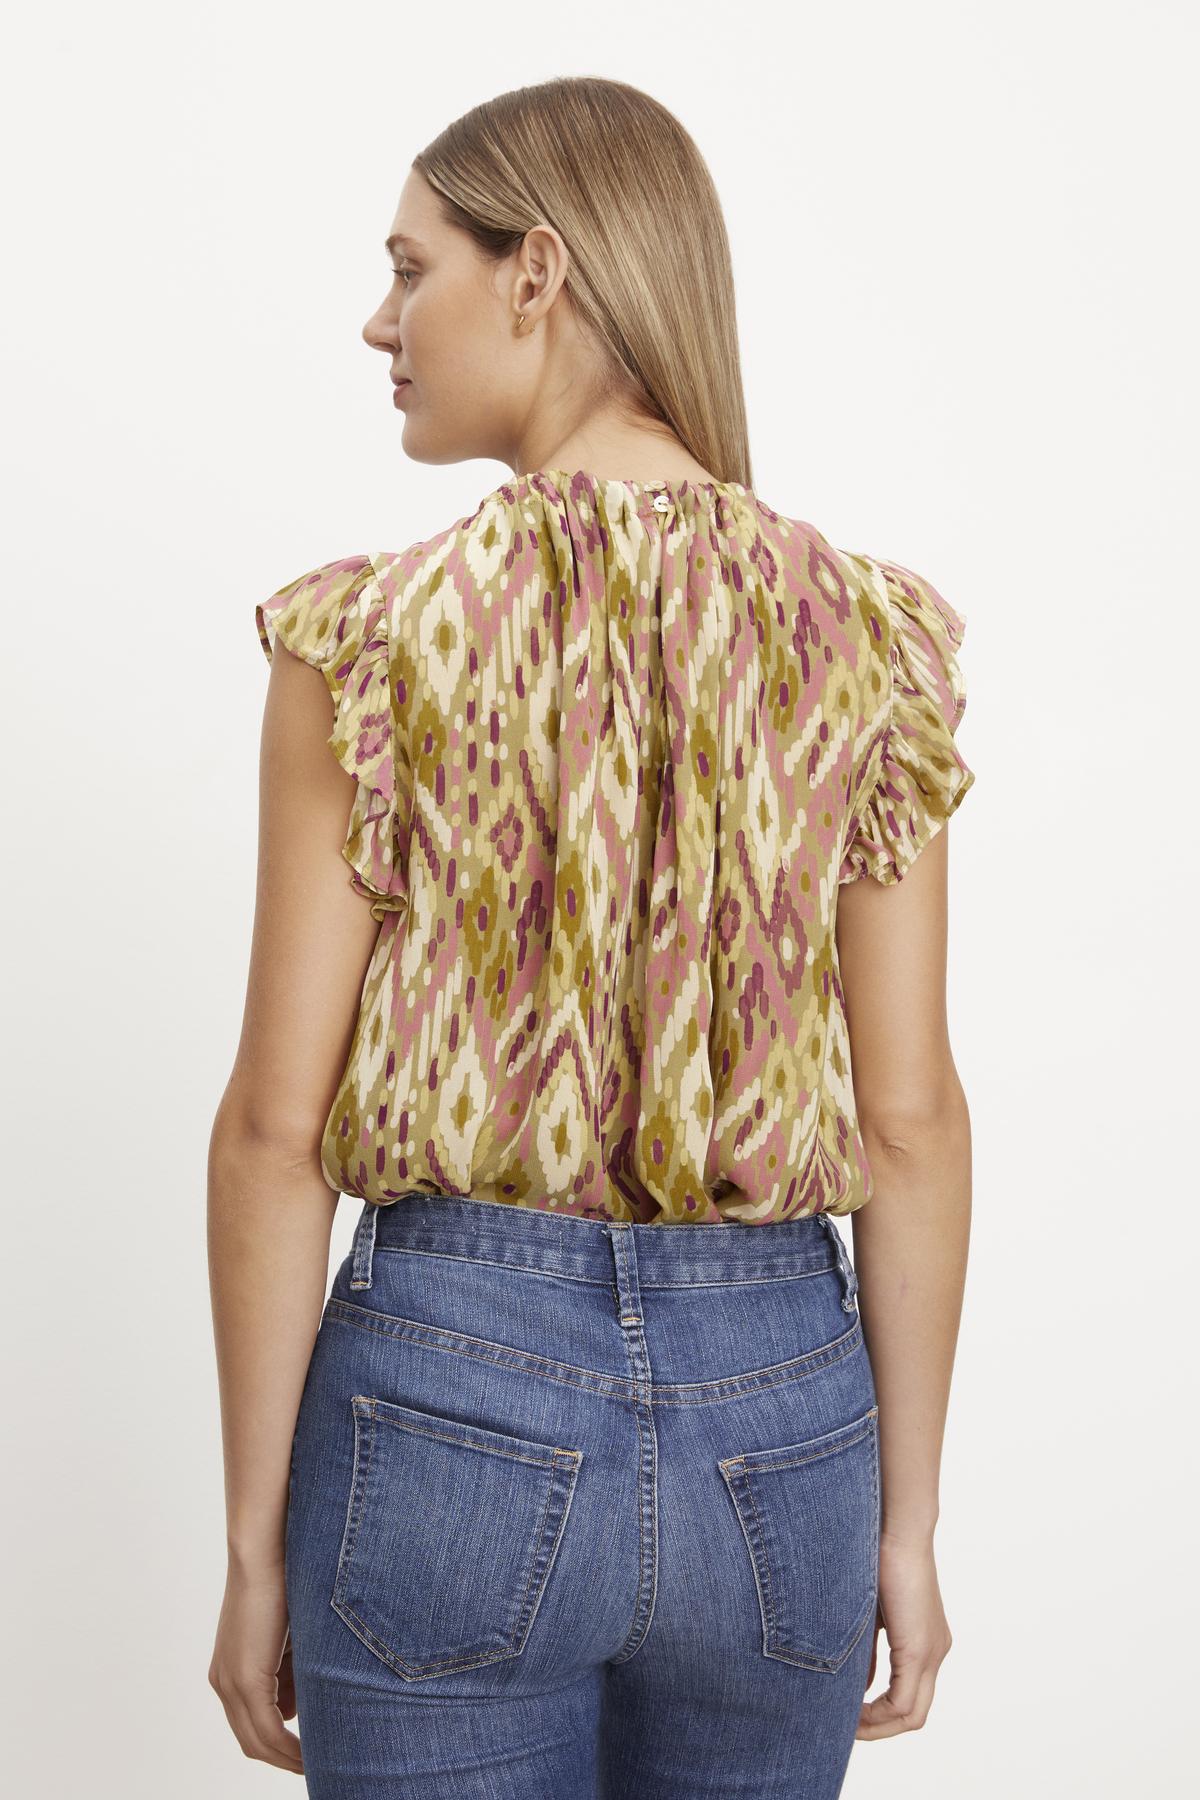   The back view of a woman wearing jeans and an ADARA PRINTED FLUTTER SLEEVE TOP by Velvet by Graham & Spencer. 